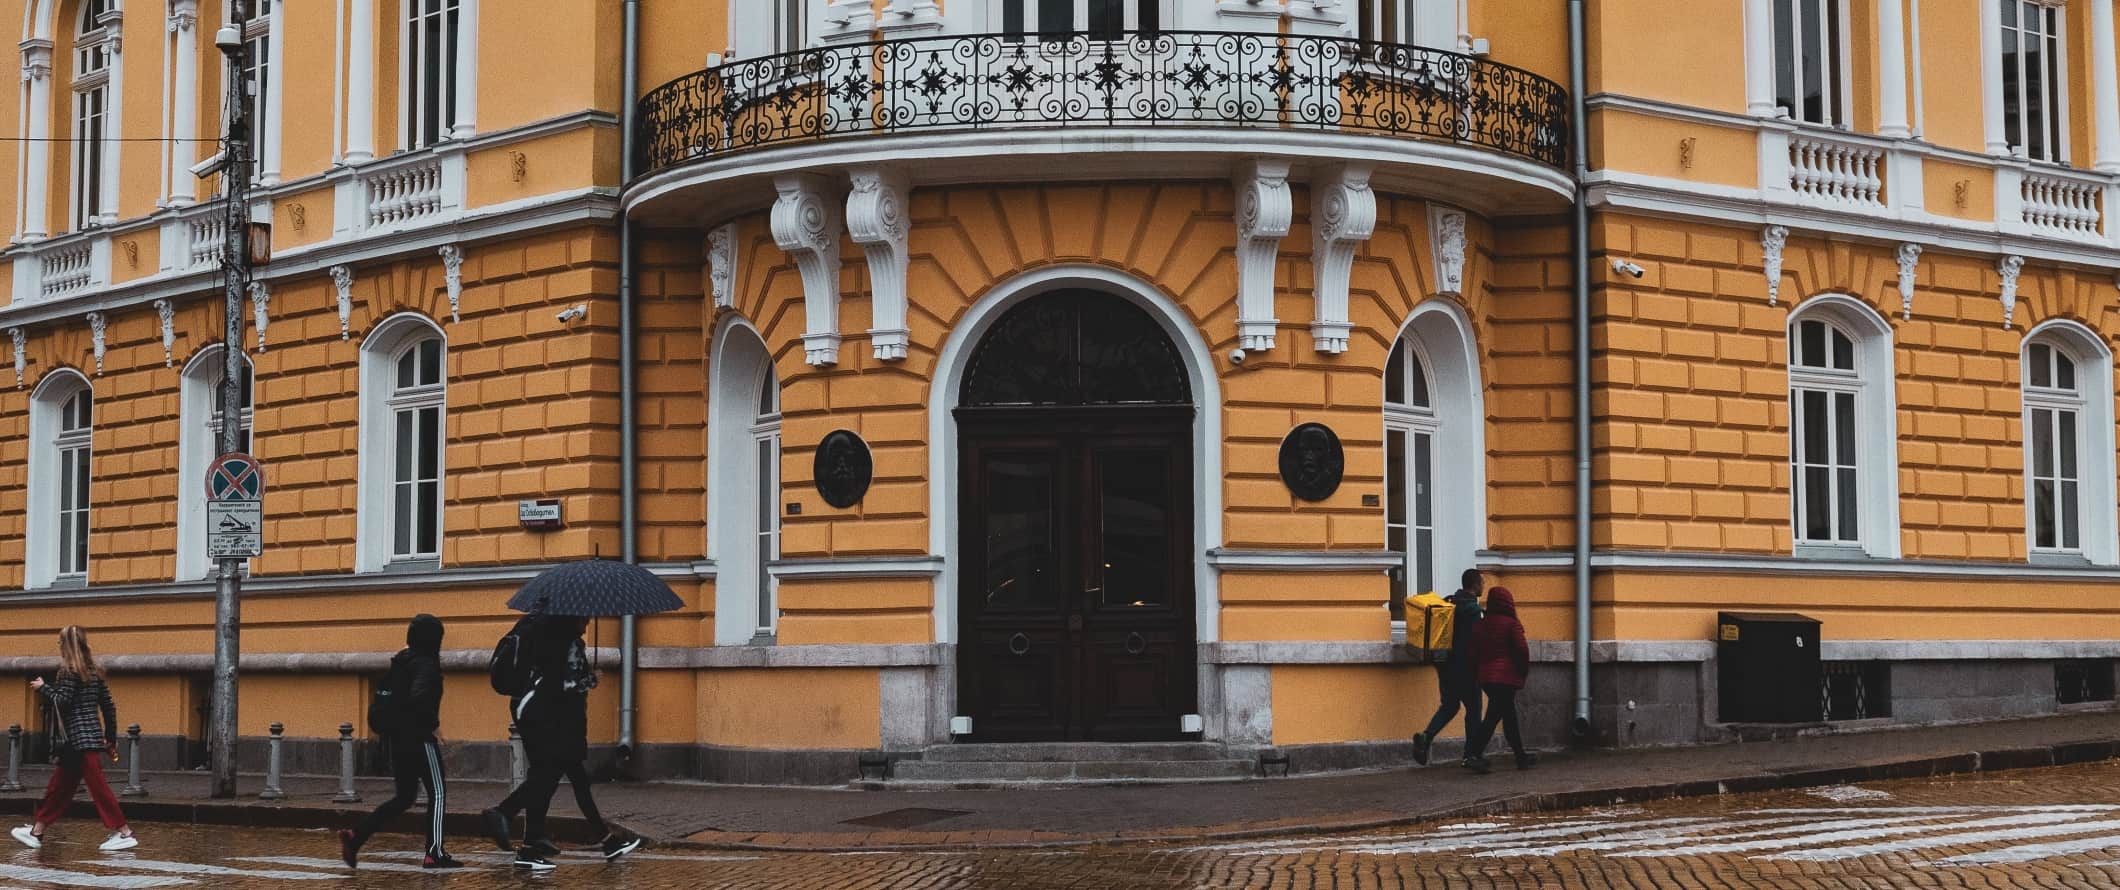 People walking down the street in the rain, past a bright yellow building in Sofia, Bulgaria